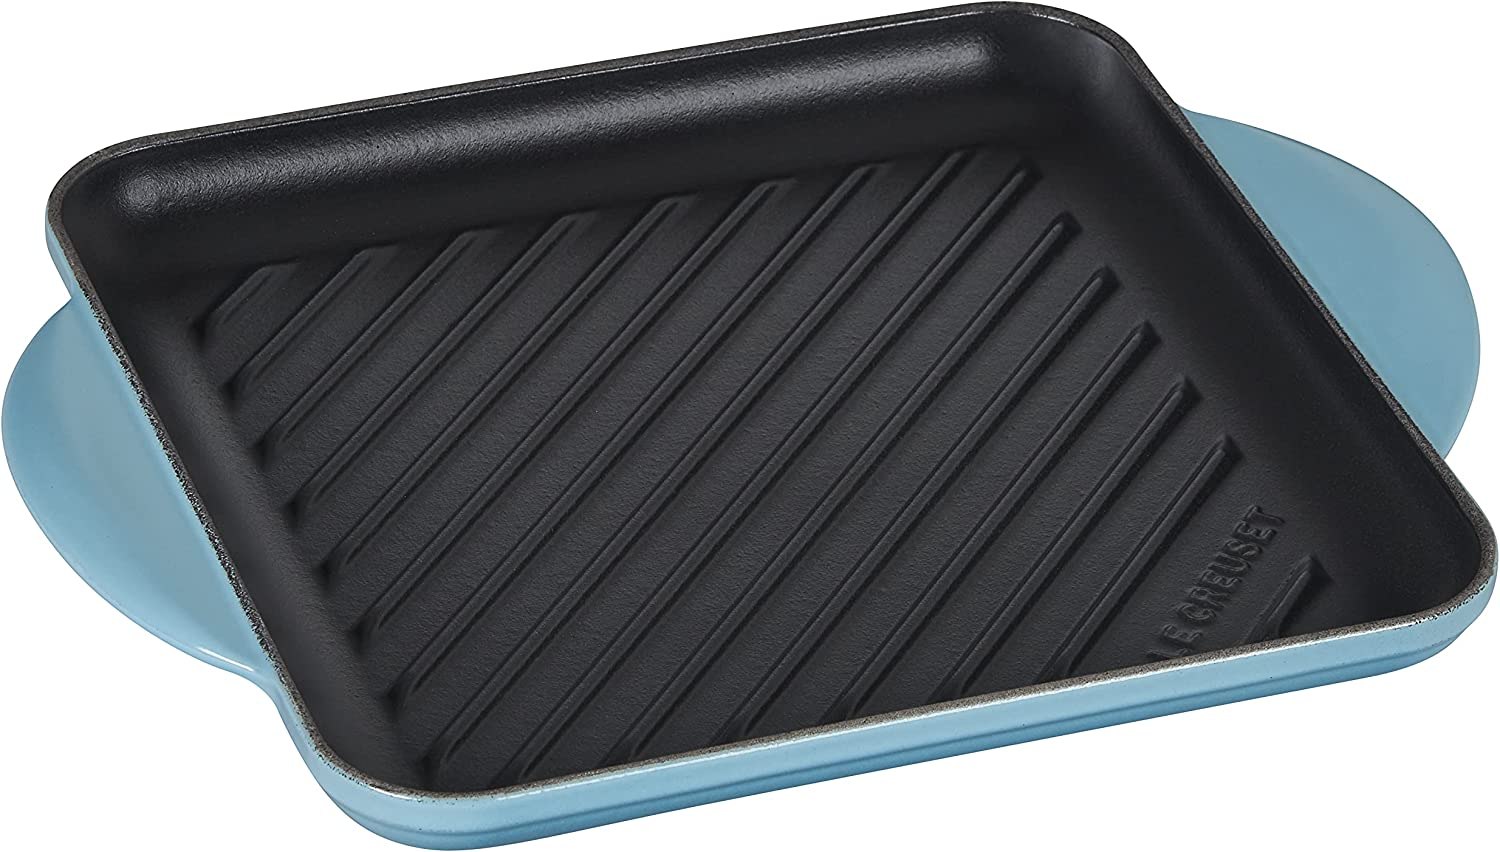 Le Creuset Enameled Cast Iron Square Grill, 9.5-Inch